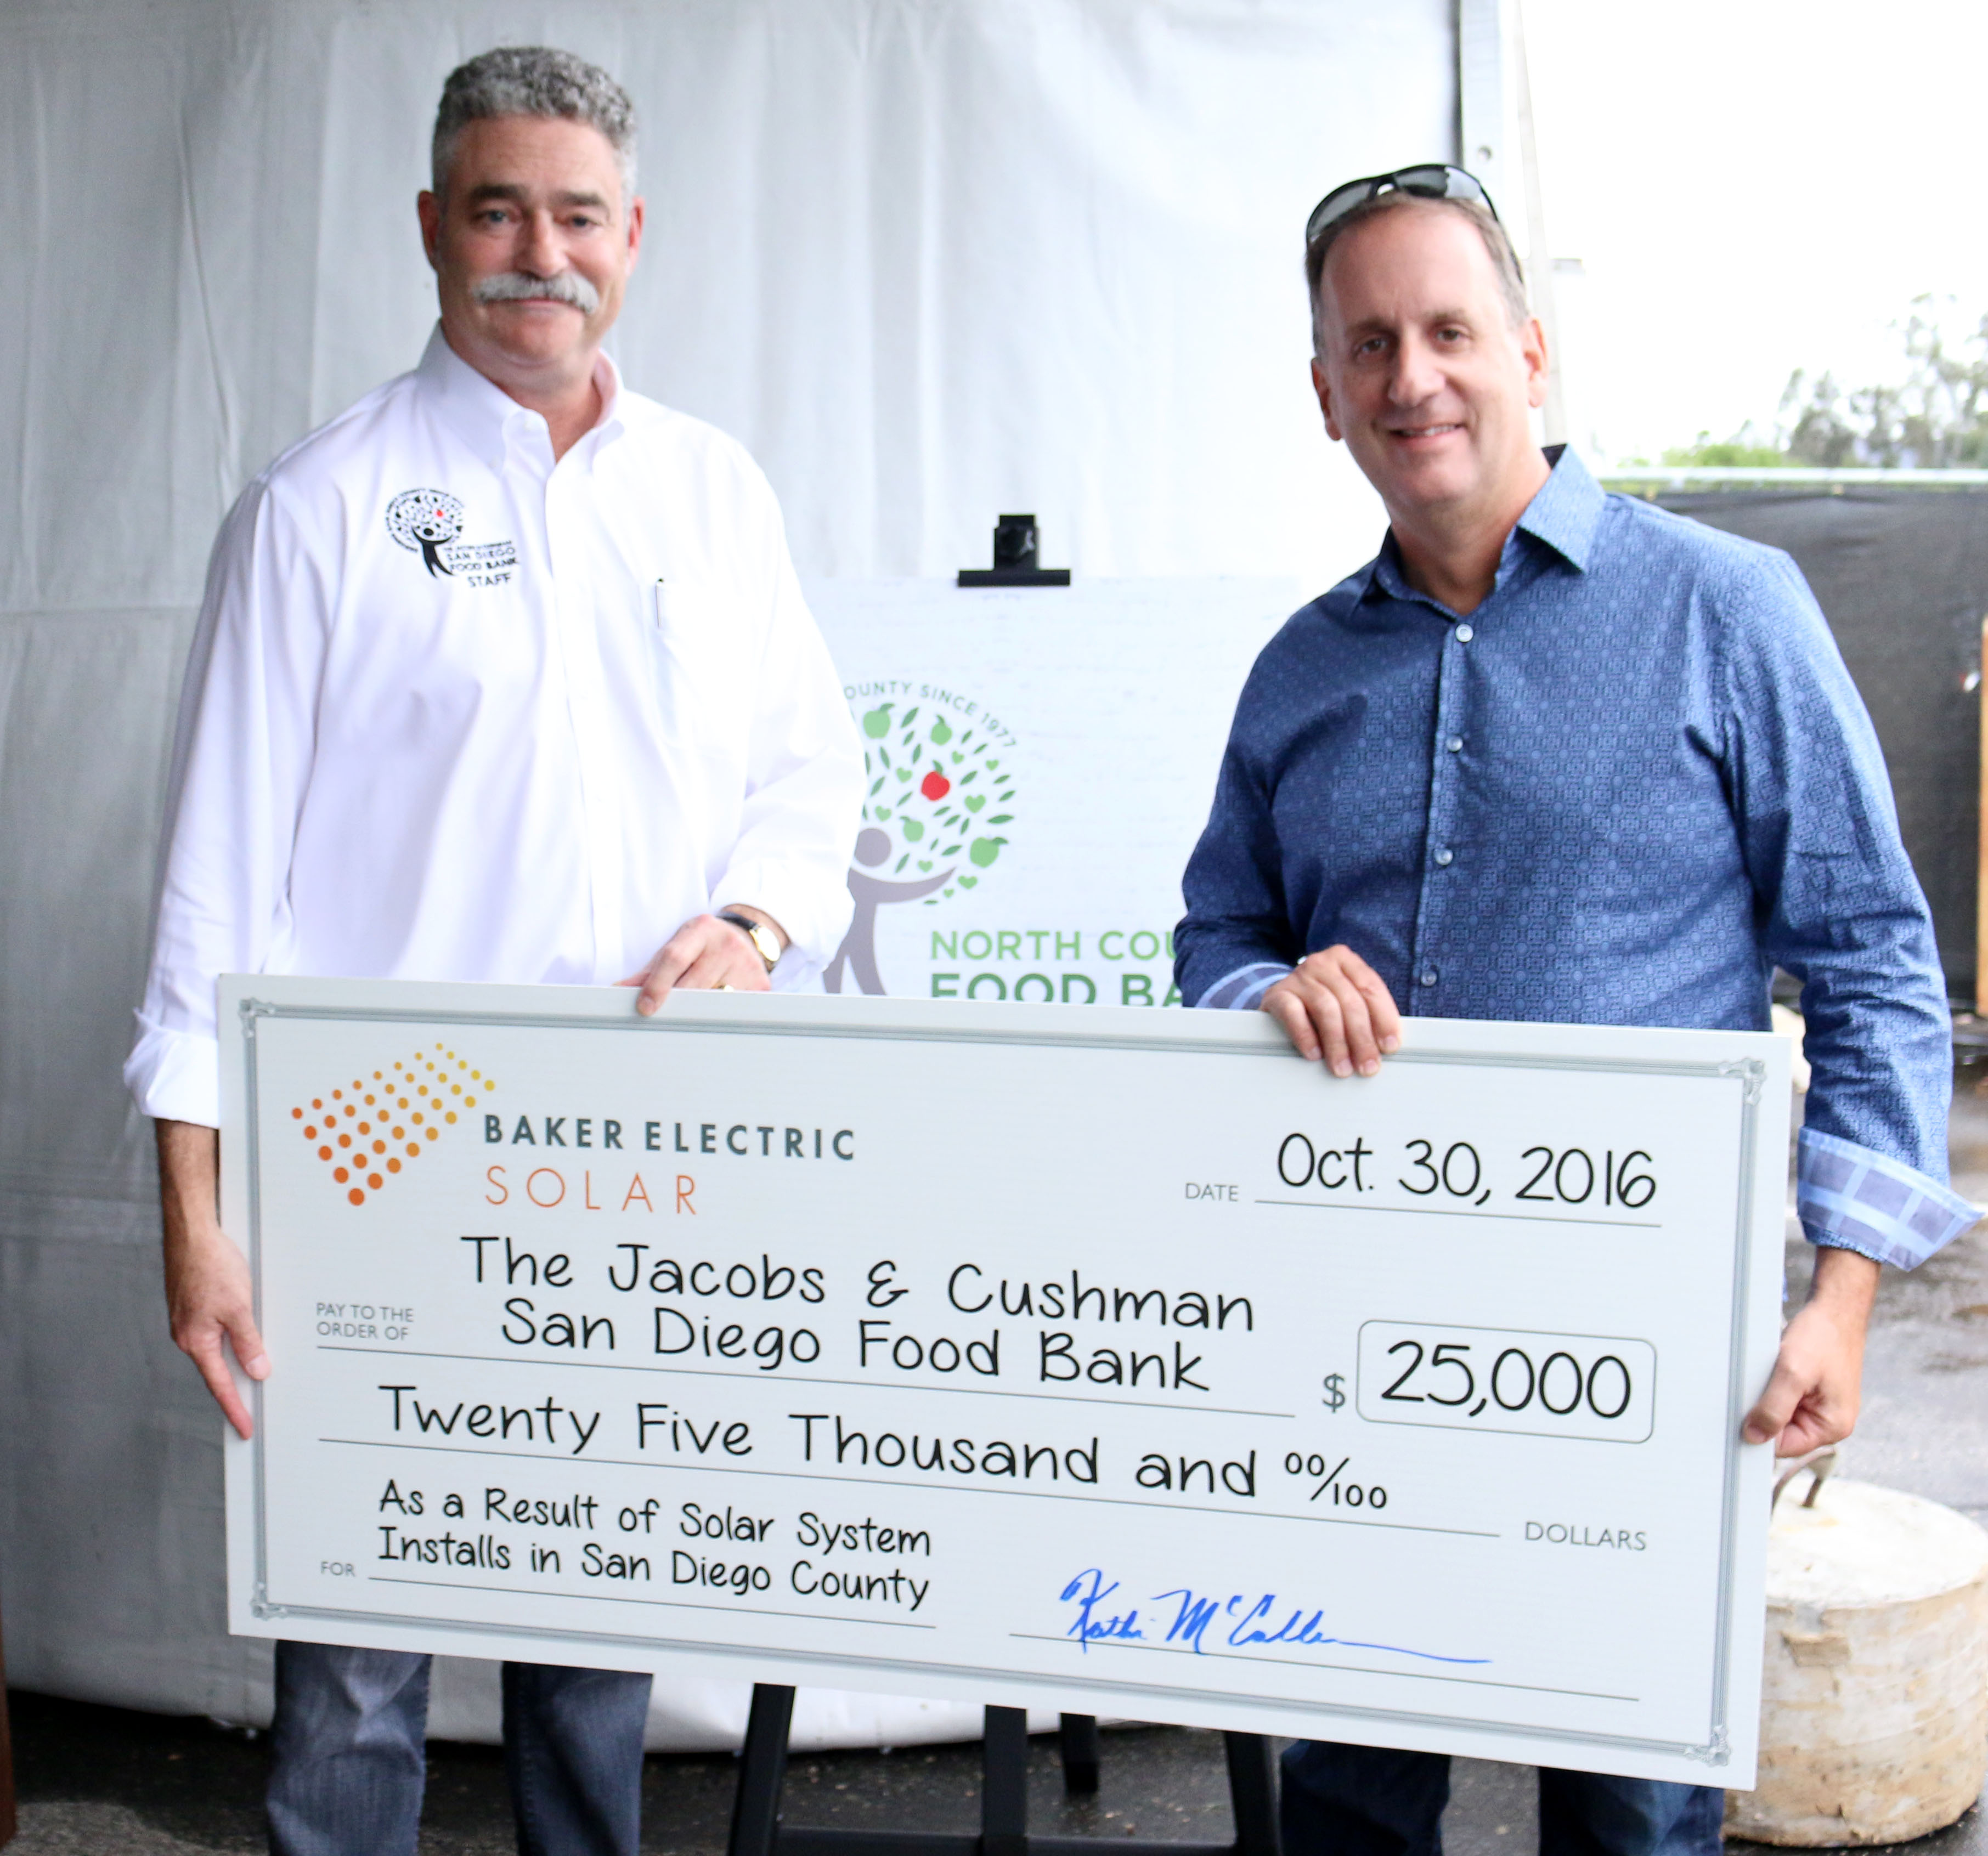 Baker Electric Solar president, Mike Teresso, presents James Floros, San Diego Food Bank CEO, with a $25,000 check in support of the North County Food Bank's hunger-relief programs.